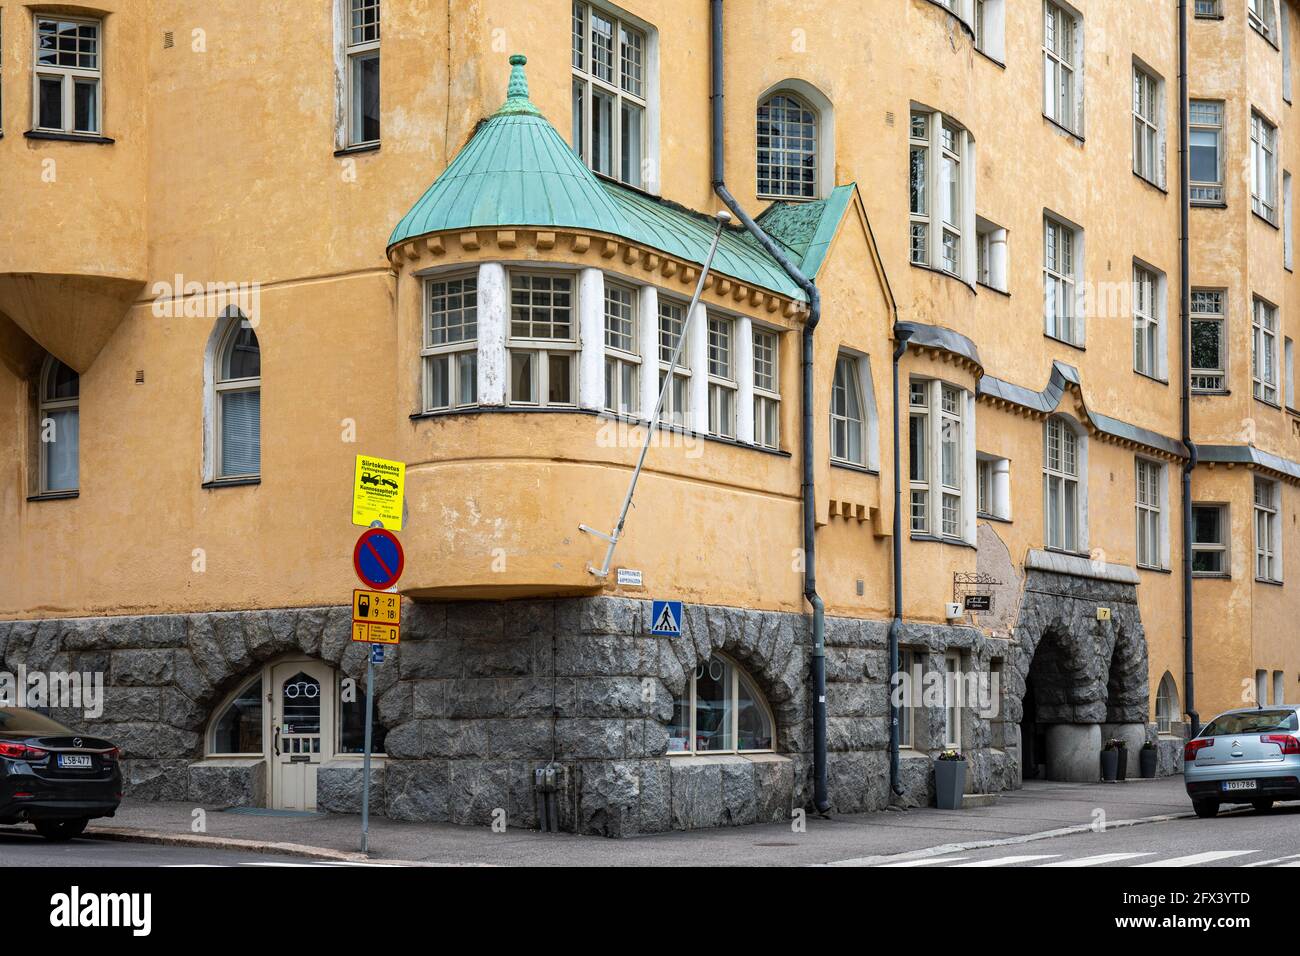 Protrusion of Art Nouveau or Jugend or Finnish National Romantic style residential building in Katajanokka district of Helsinki, Finland Stock Photo